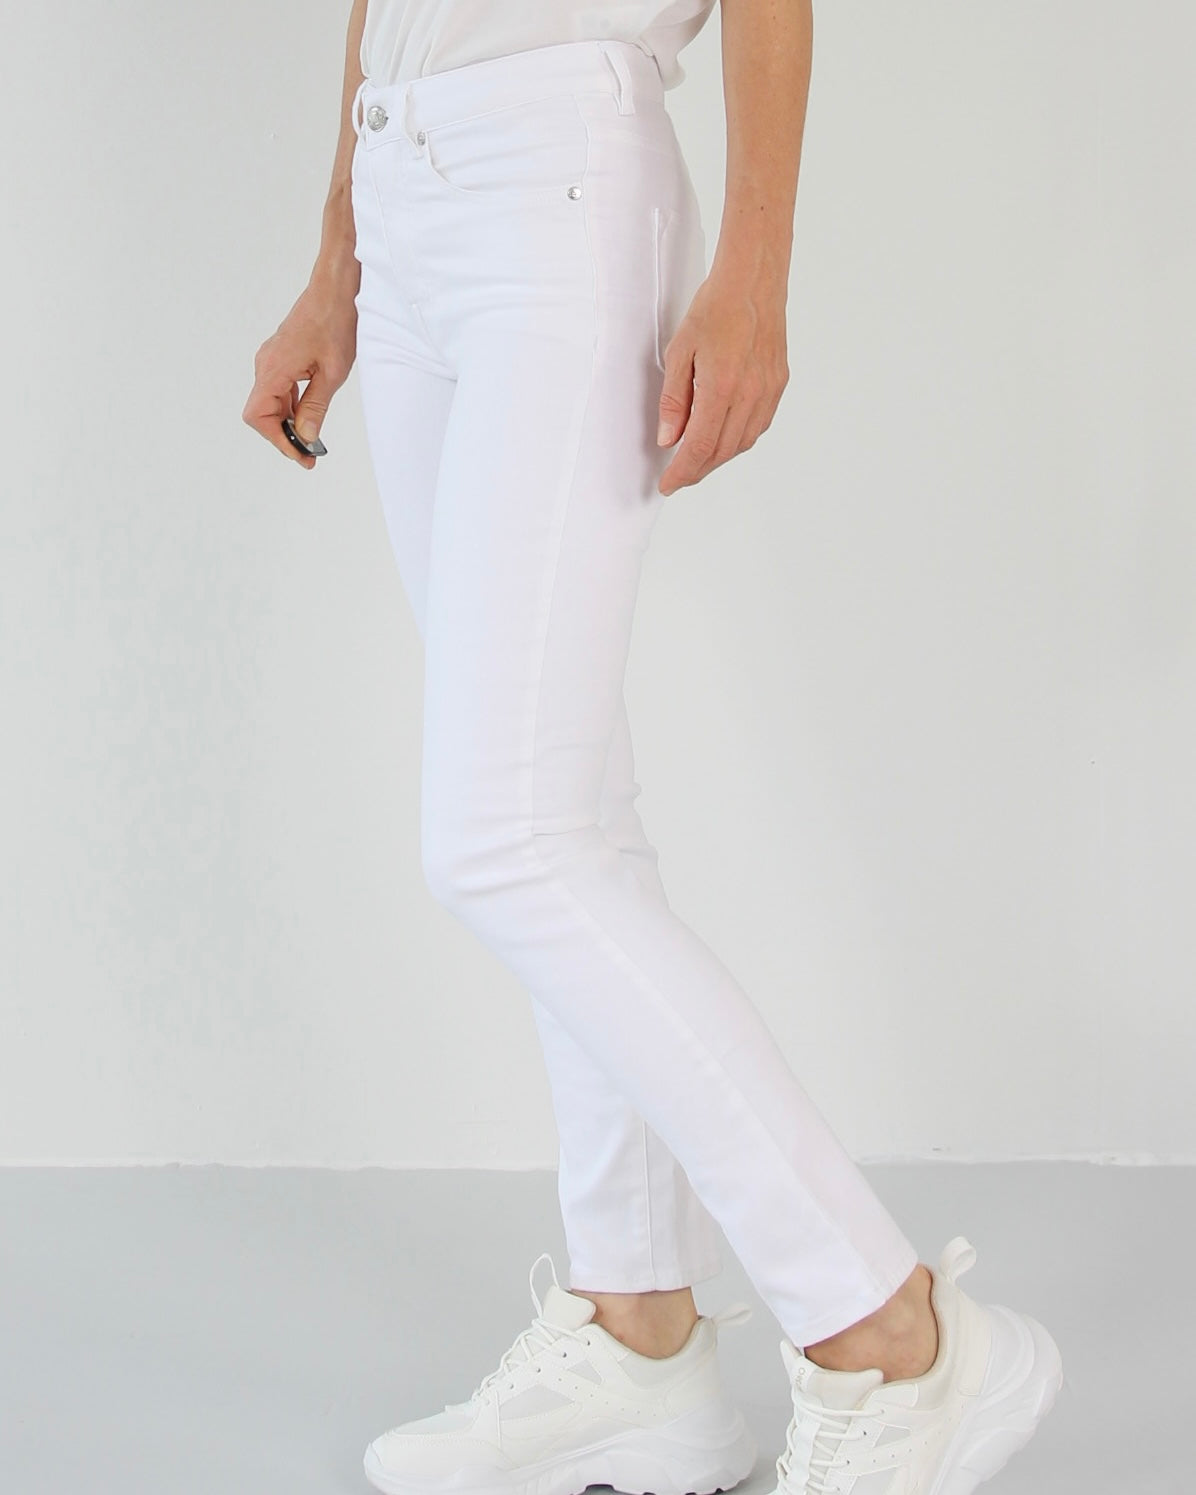 Ellery White Jeans - Dame - Tailored  - High waist - Stretchy